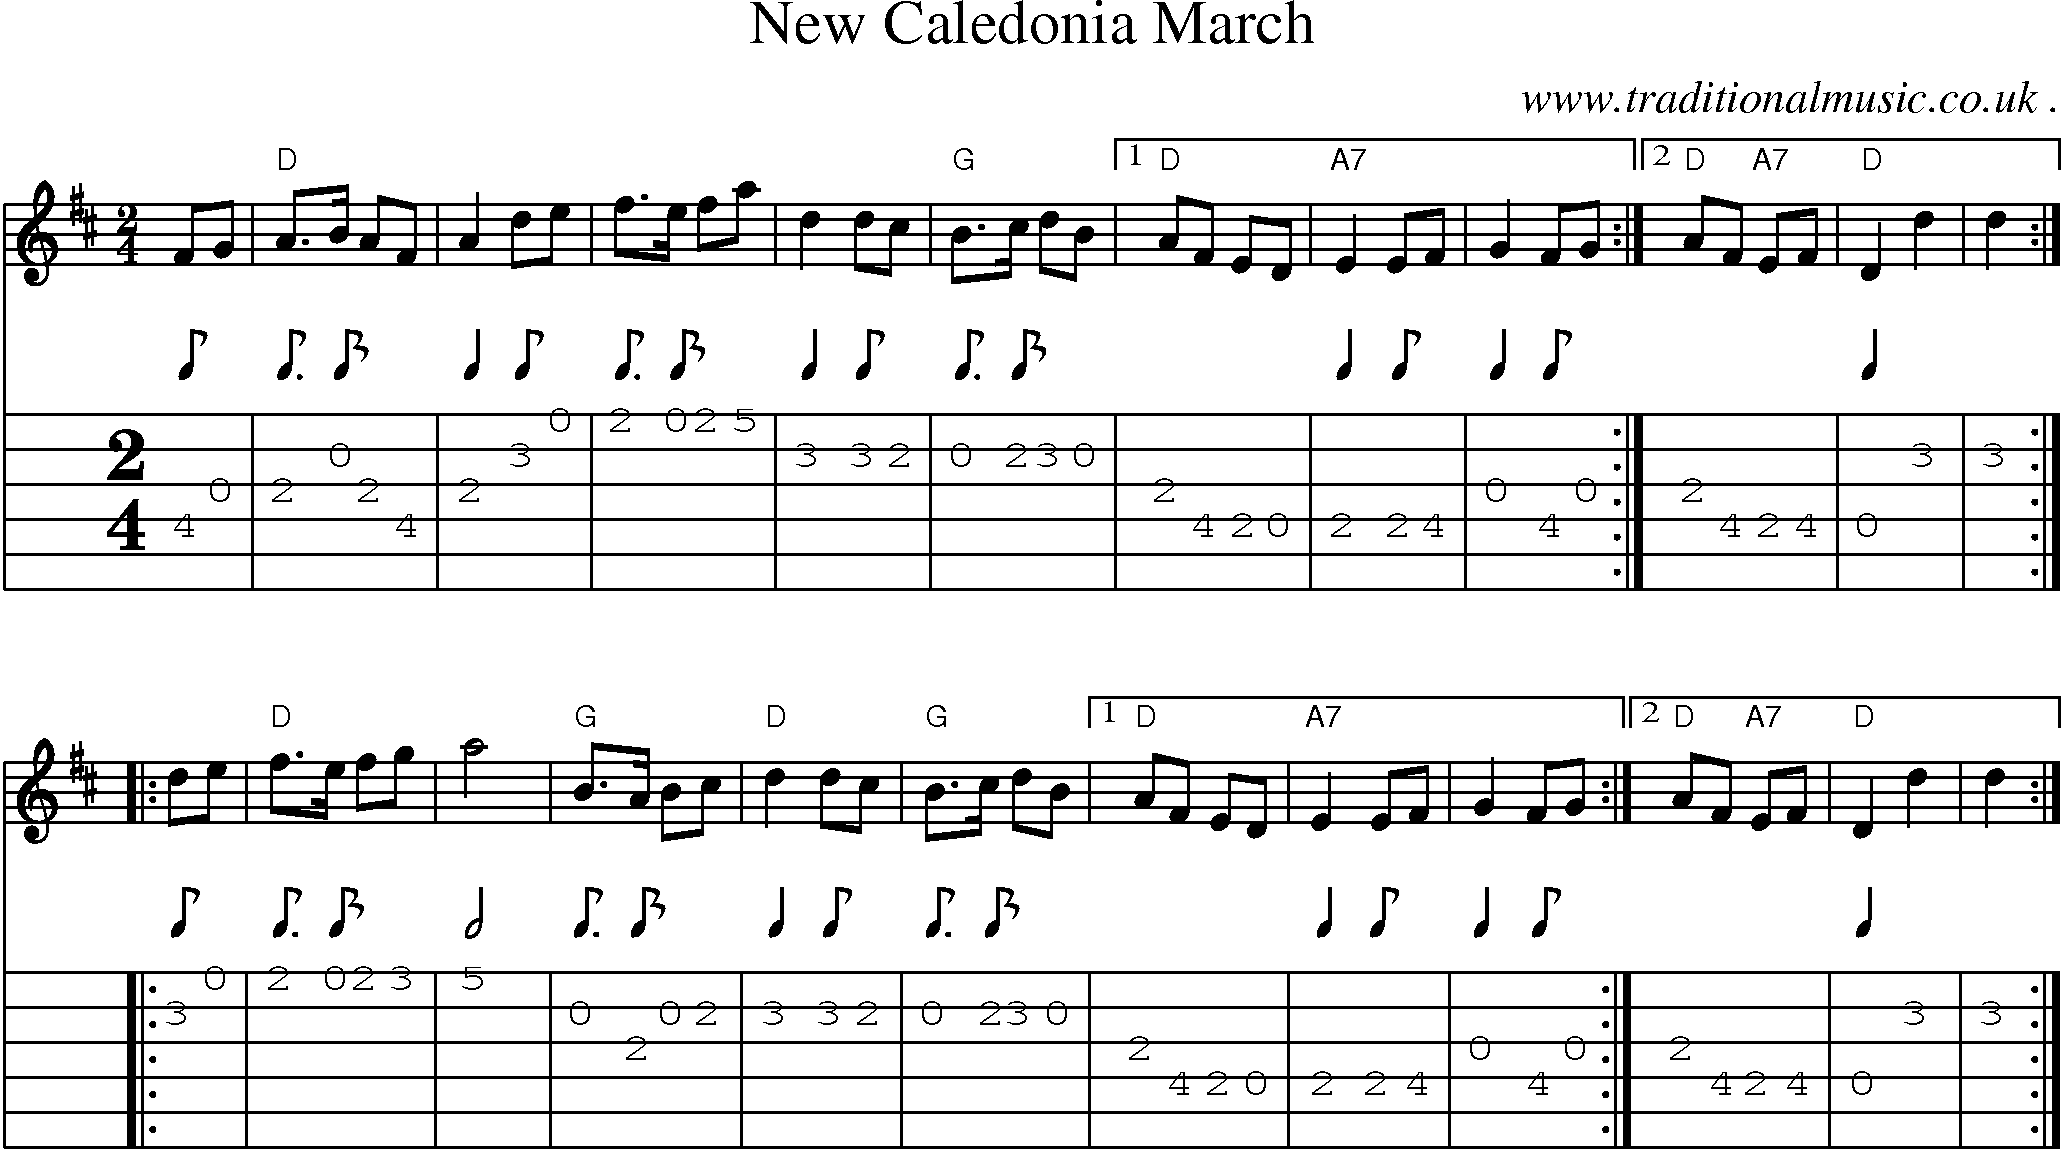 Sheet-music  score, Chords and Guitar Tabs for New Caledonia March